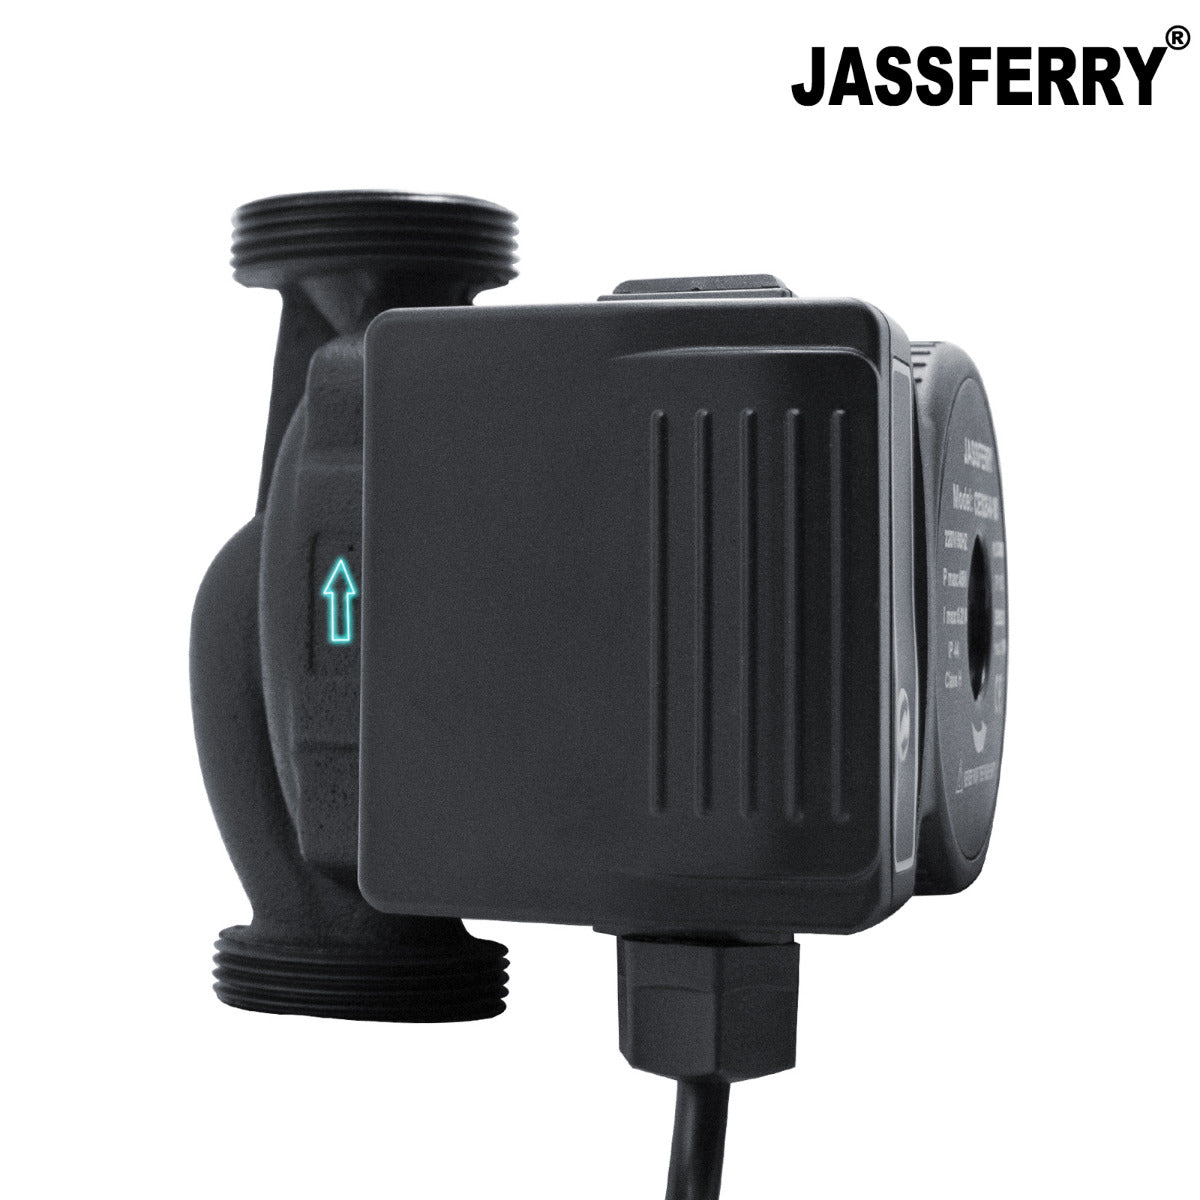 JassferryJASSFERRY New A-Rated Central Heating Pump Energy-saving Hot Water CirculationHeating Pumps